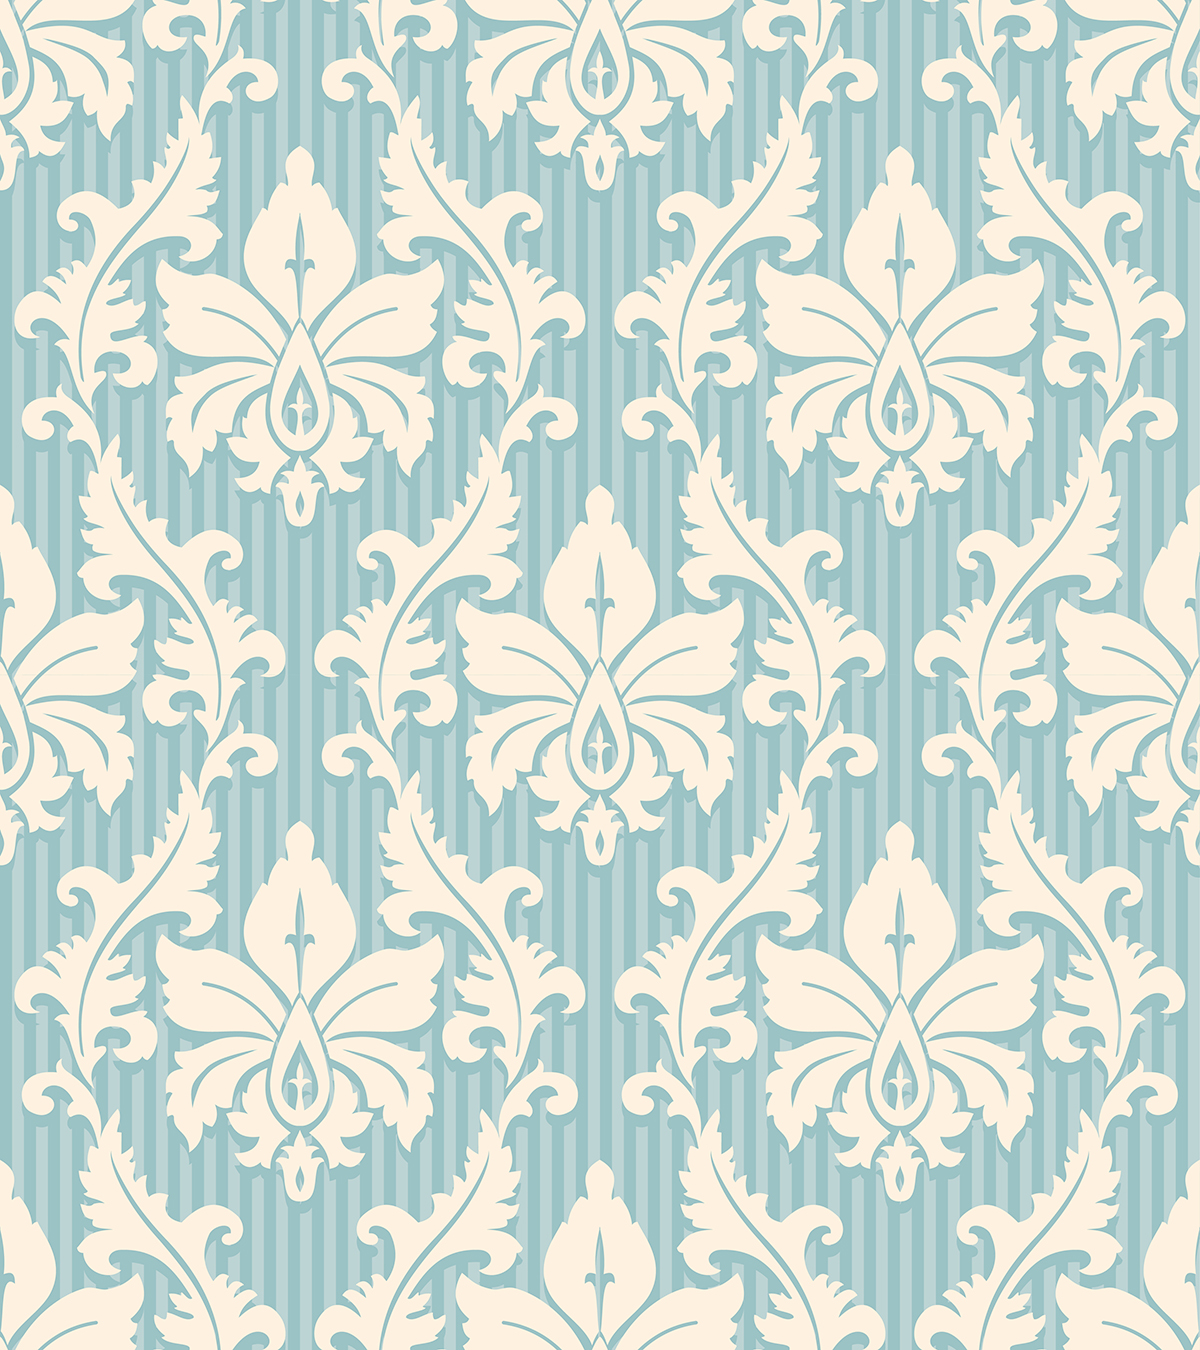 A pattern of white and blue flowers